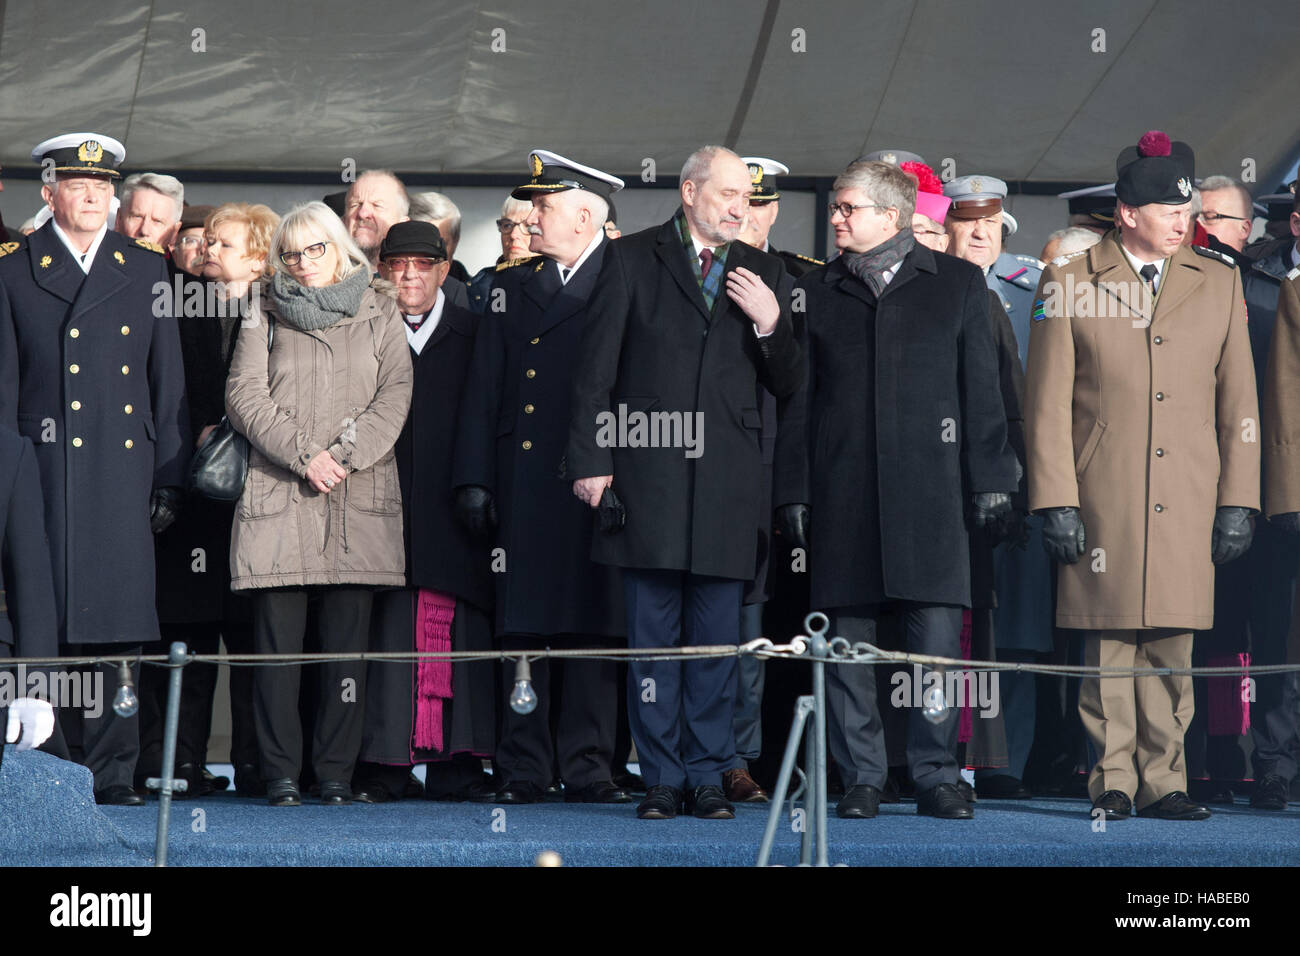 Gdansk, Poland 29 November 2016   Minister of Defence Antoni Macierewicz (C) attends the 94th Anniversary of the Polish Navy celebrations in Gdynia. Stock Photo